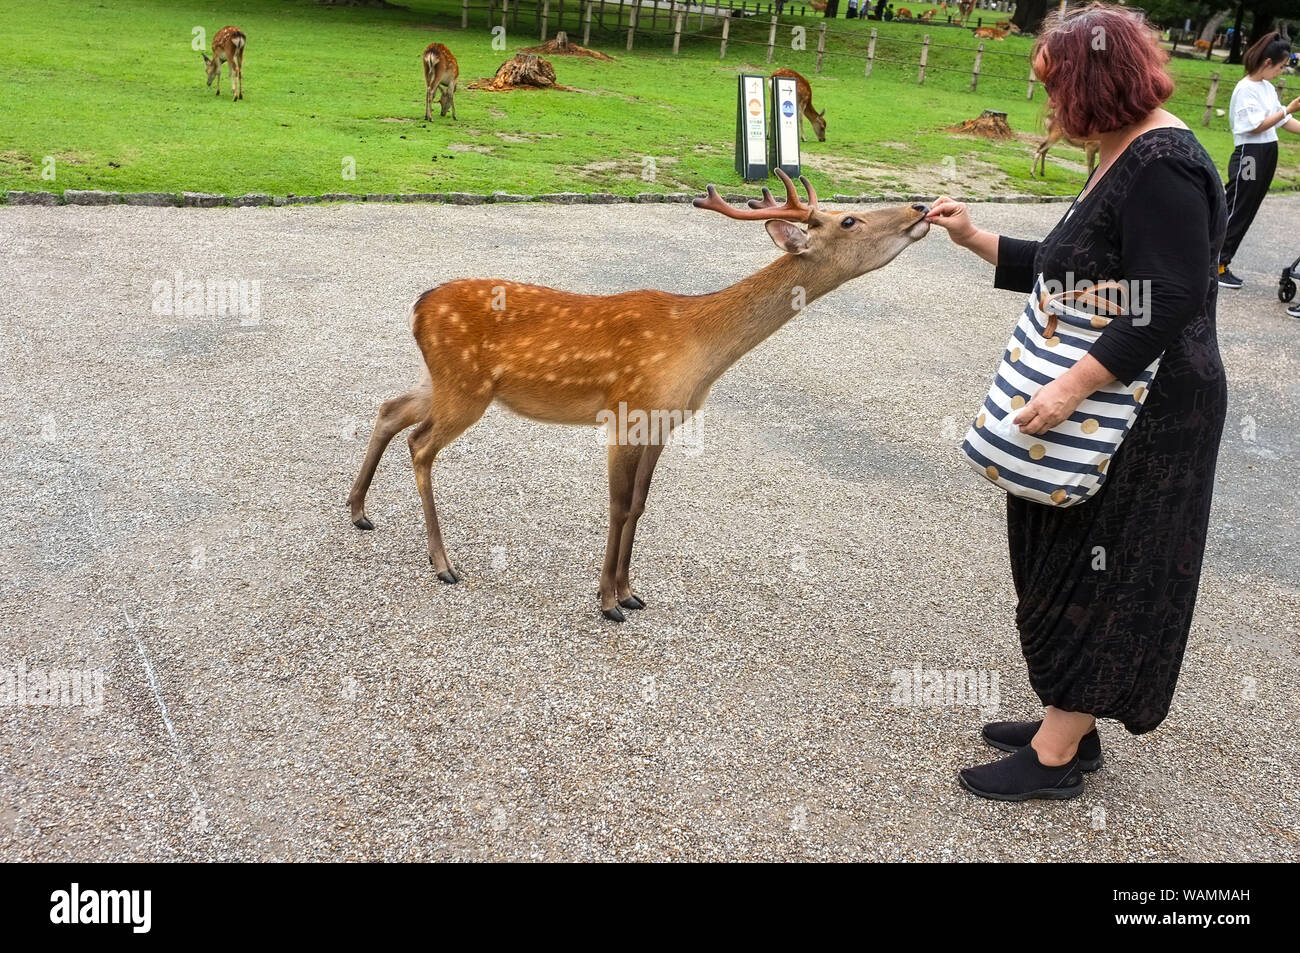 A woman  giving treat to the sacred deer of Nara, Nara-Shi in Japan. The deer are sika deer (Cervus nippon) also known as the spotted deer. Stock Photo